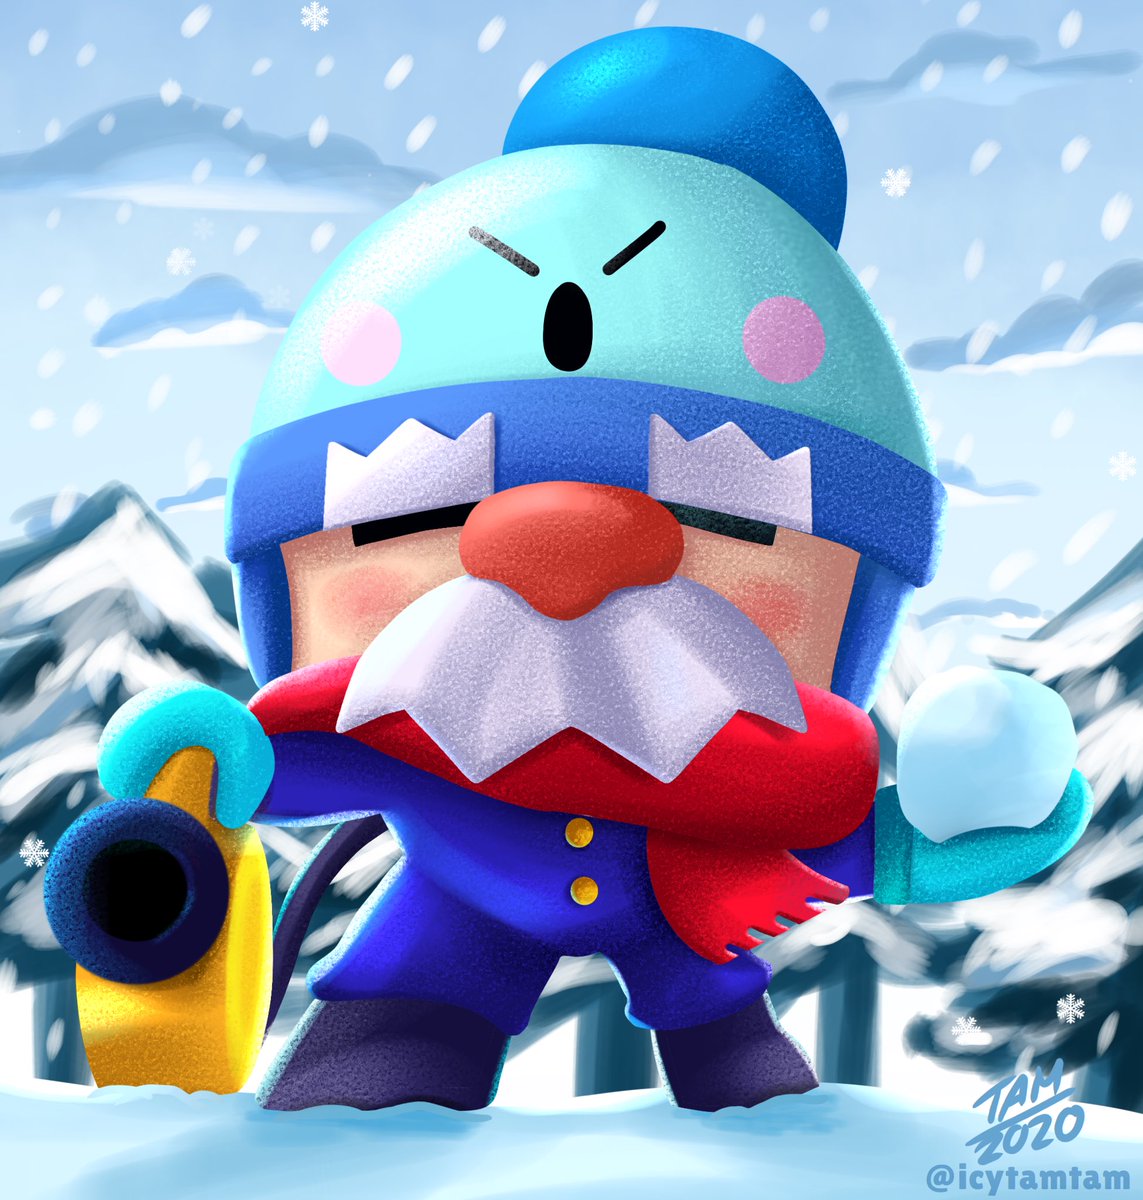 Icytamtam33 En Twitter Part 99999 Of I Am Super Grateful That Supercell Hired Pawchaw Because He Is An Absolute Legend And Has Amazing Adroable Designs Gale Might Just Be My Favourite - brawl stars cortos